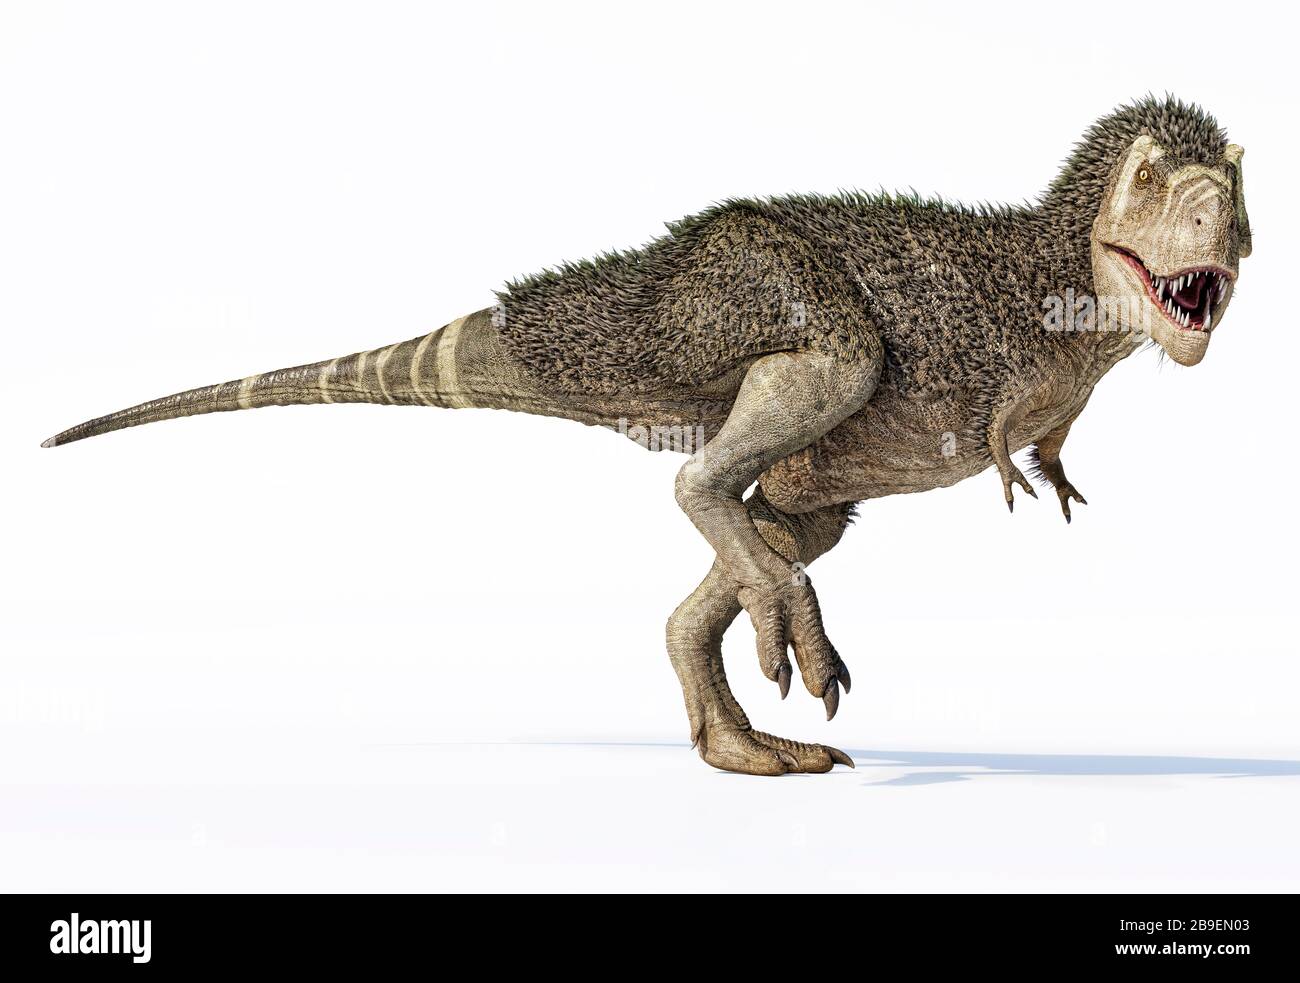 3D illustration of a T-rex dinosaur with feathers. Stock Photo